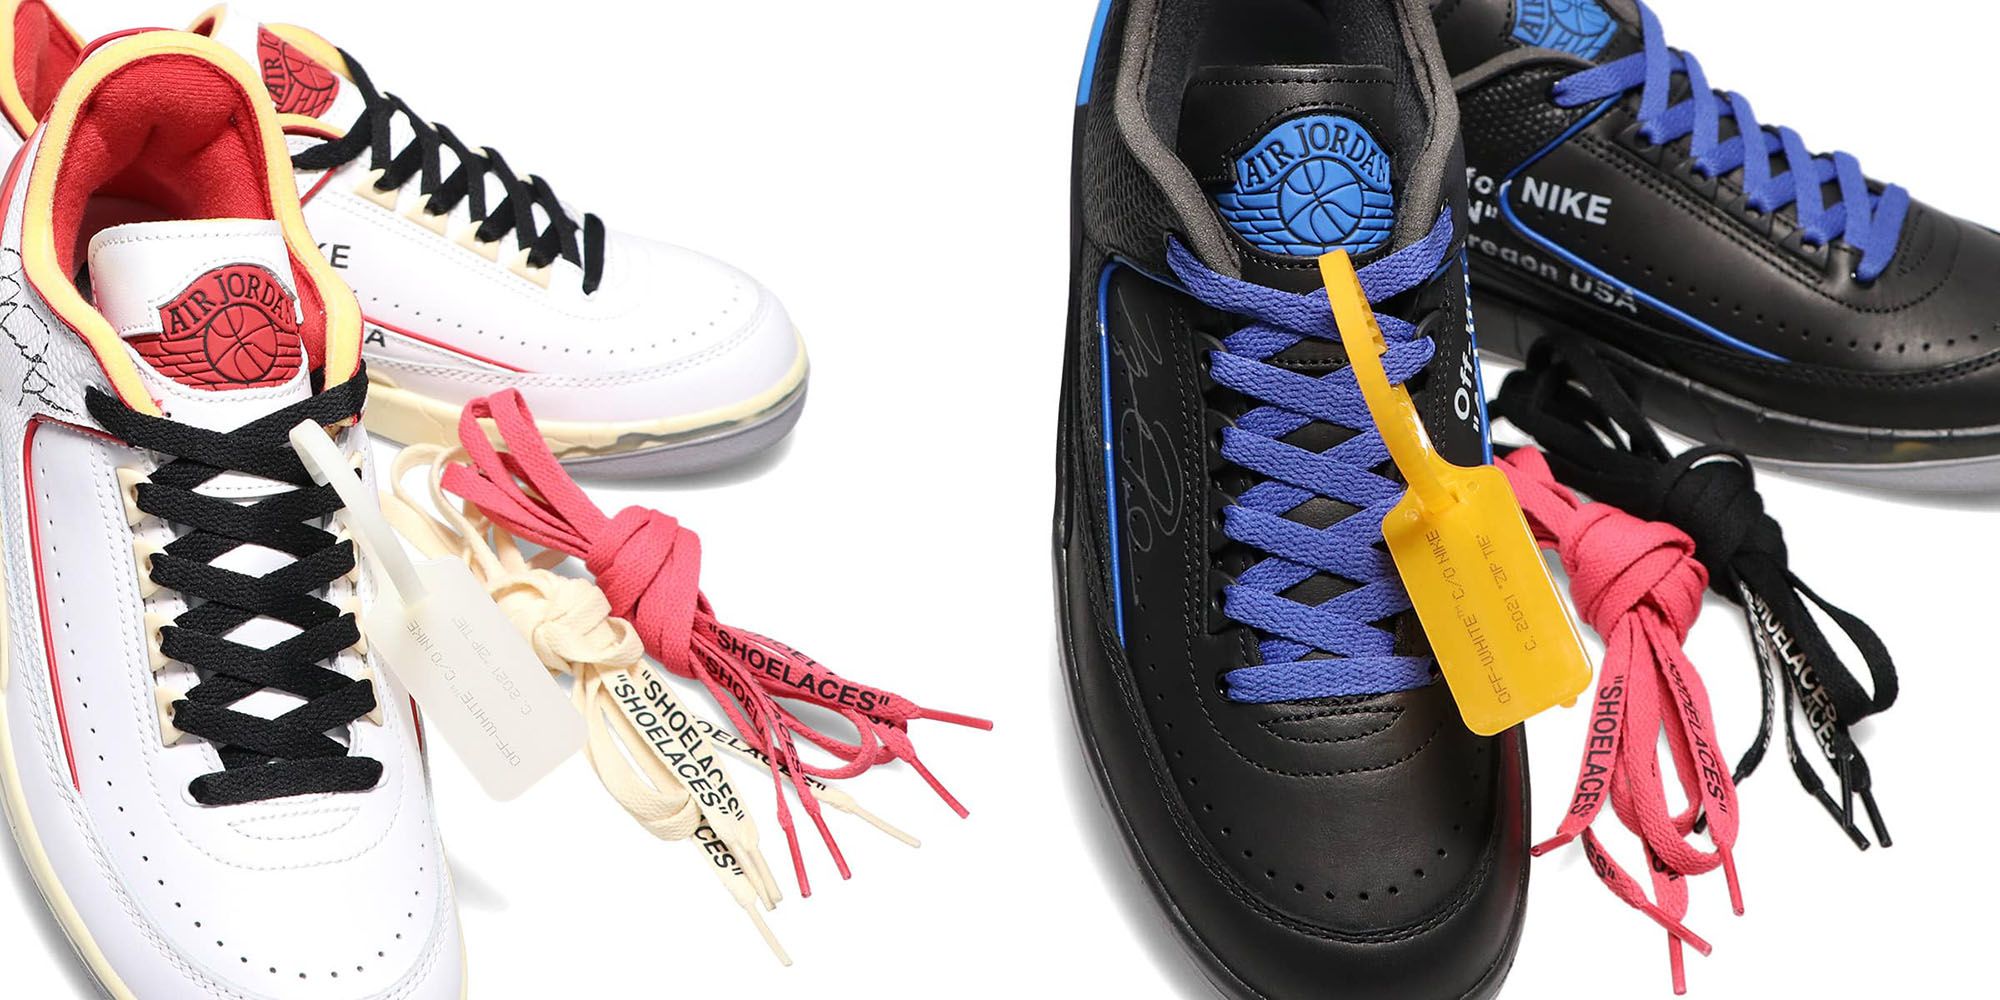 How to Cop the OFF-WHITE x Air Jordan 2 Low